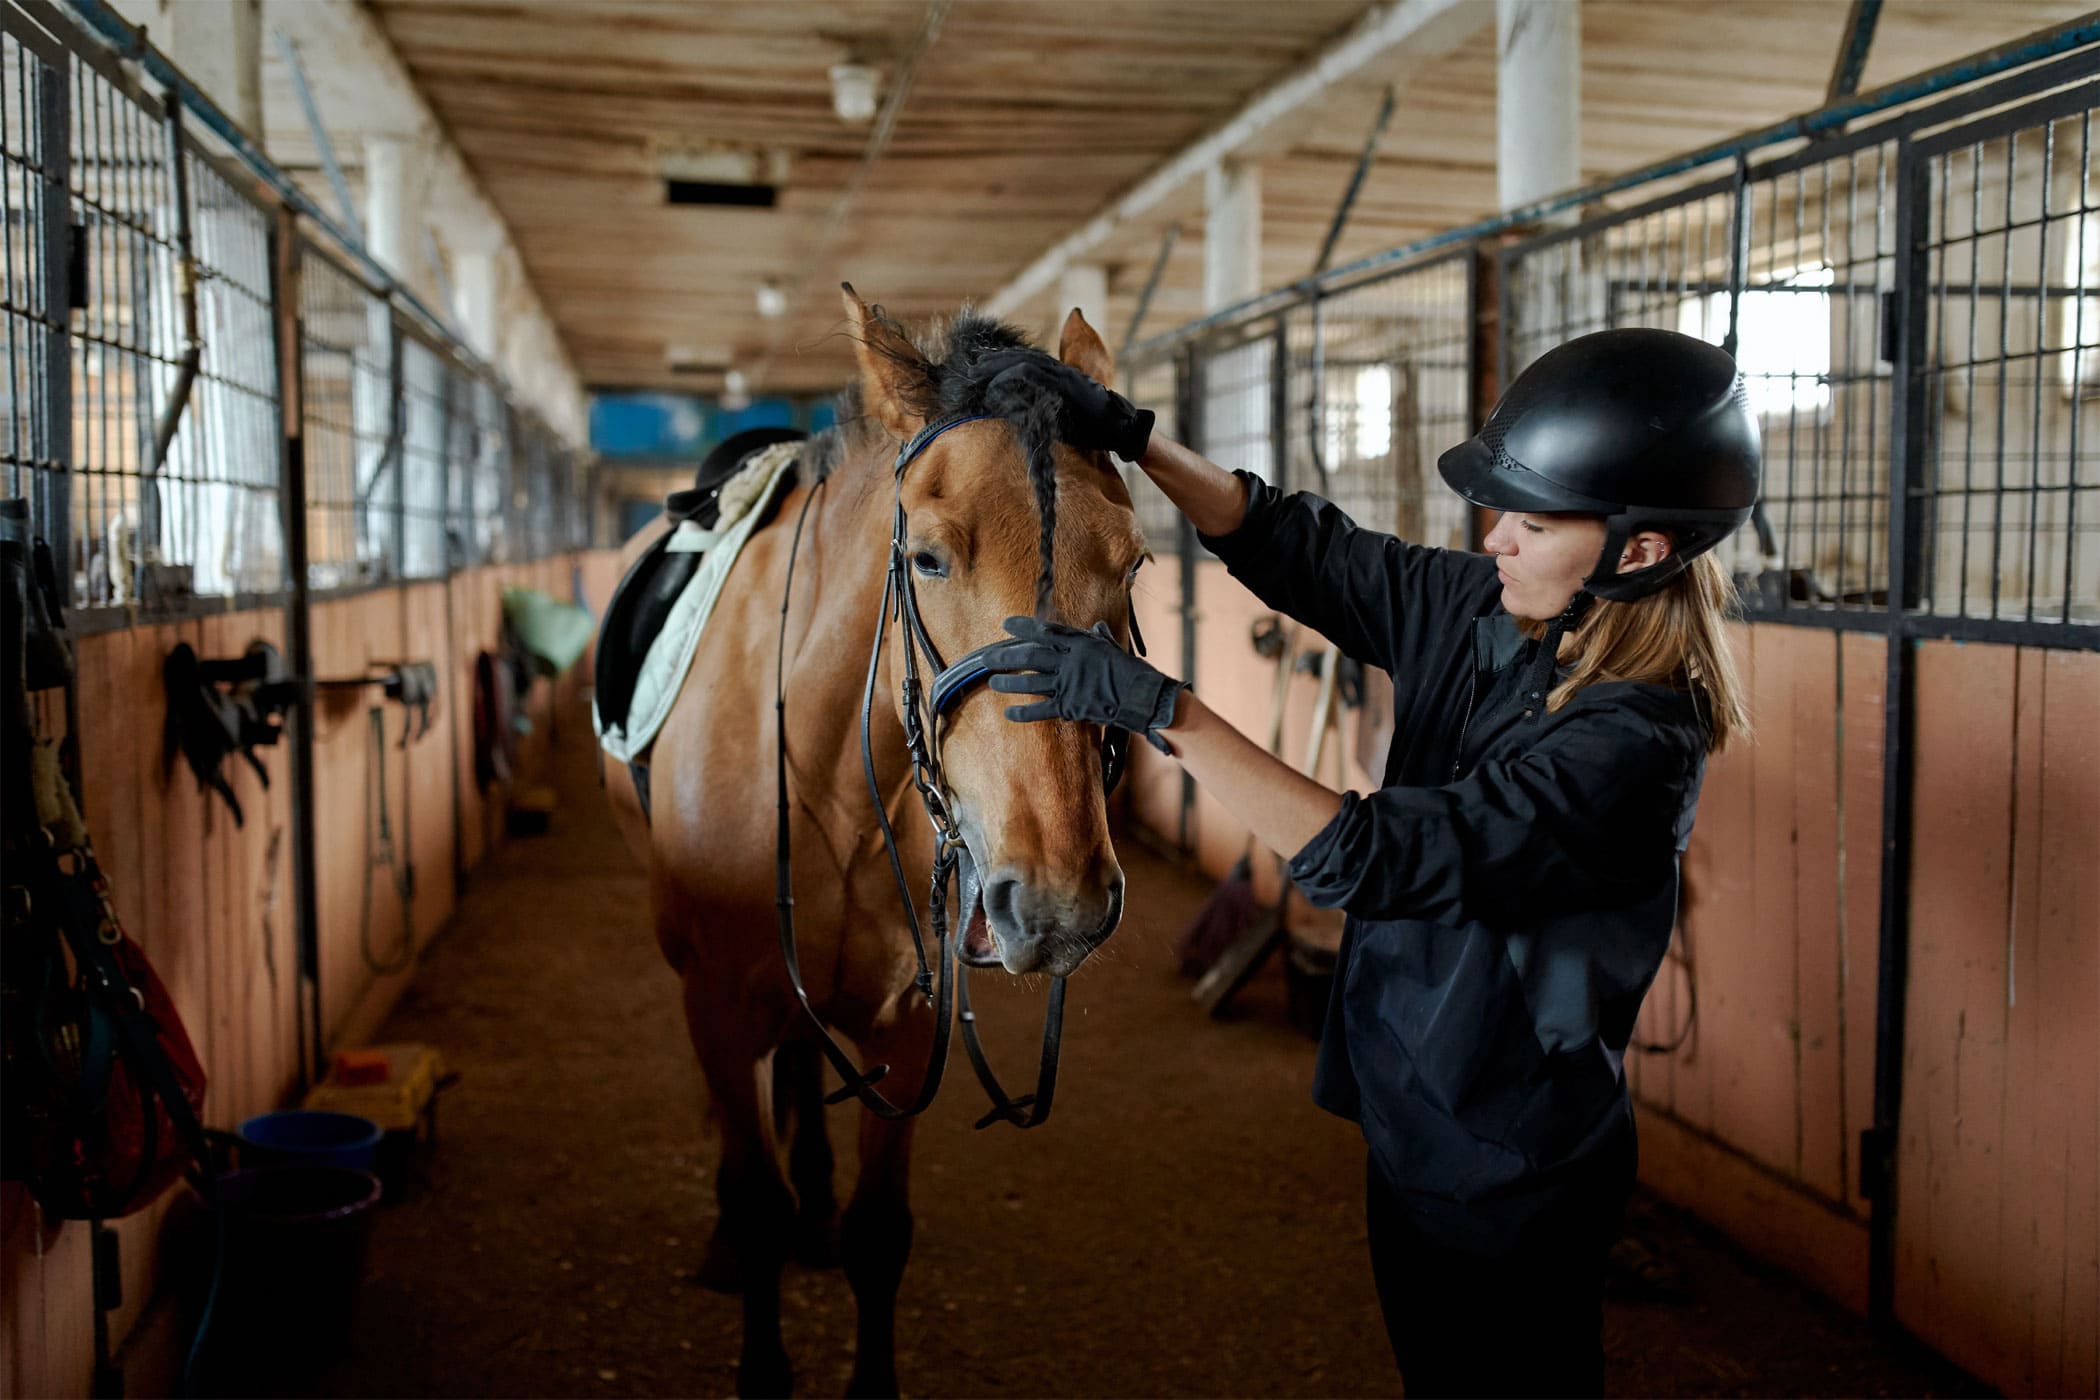 The Inspiring Journey of an Equestrian with Disabilities